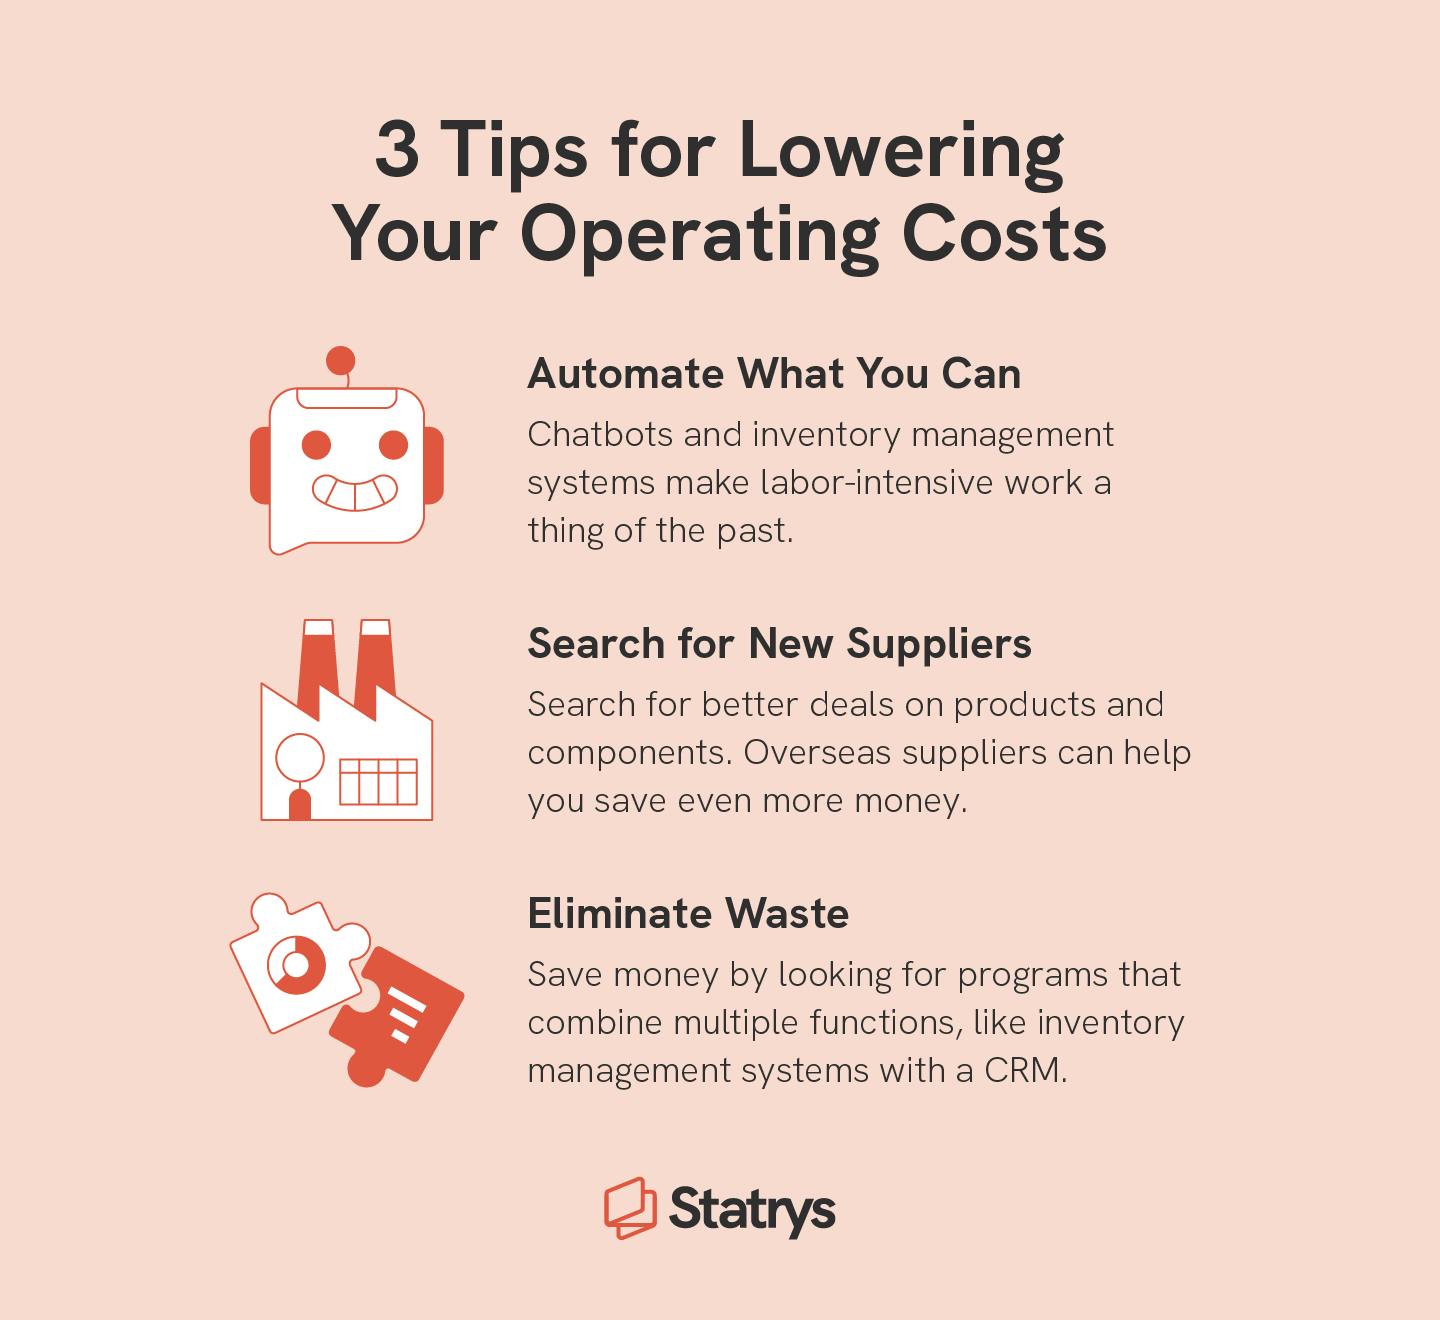 An illustrated chart with tips for lowering your operating costs as a way to learn how to grow an ecommerce business including automation, new suppliers, and reducing waste.